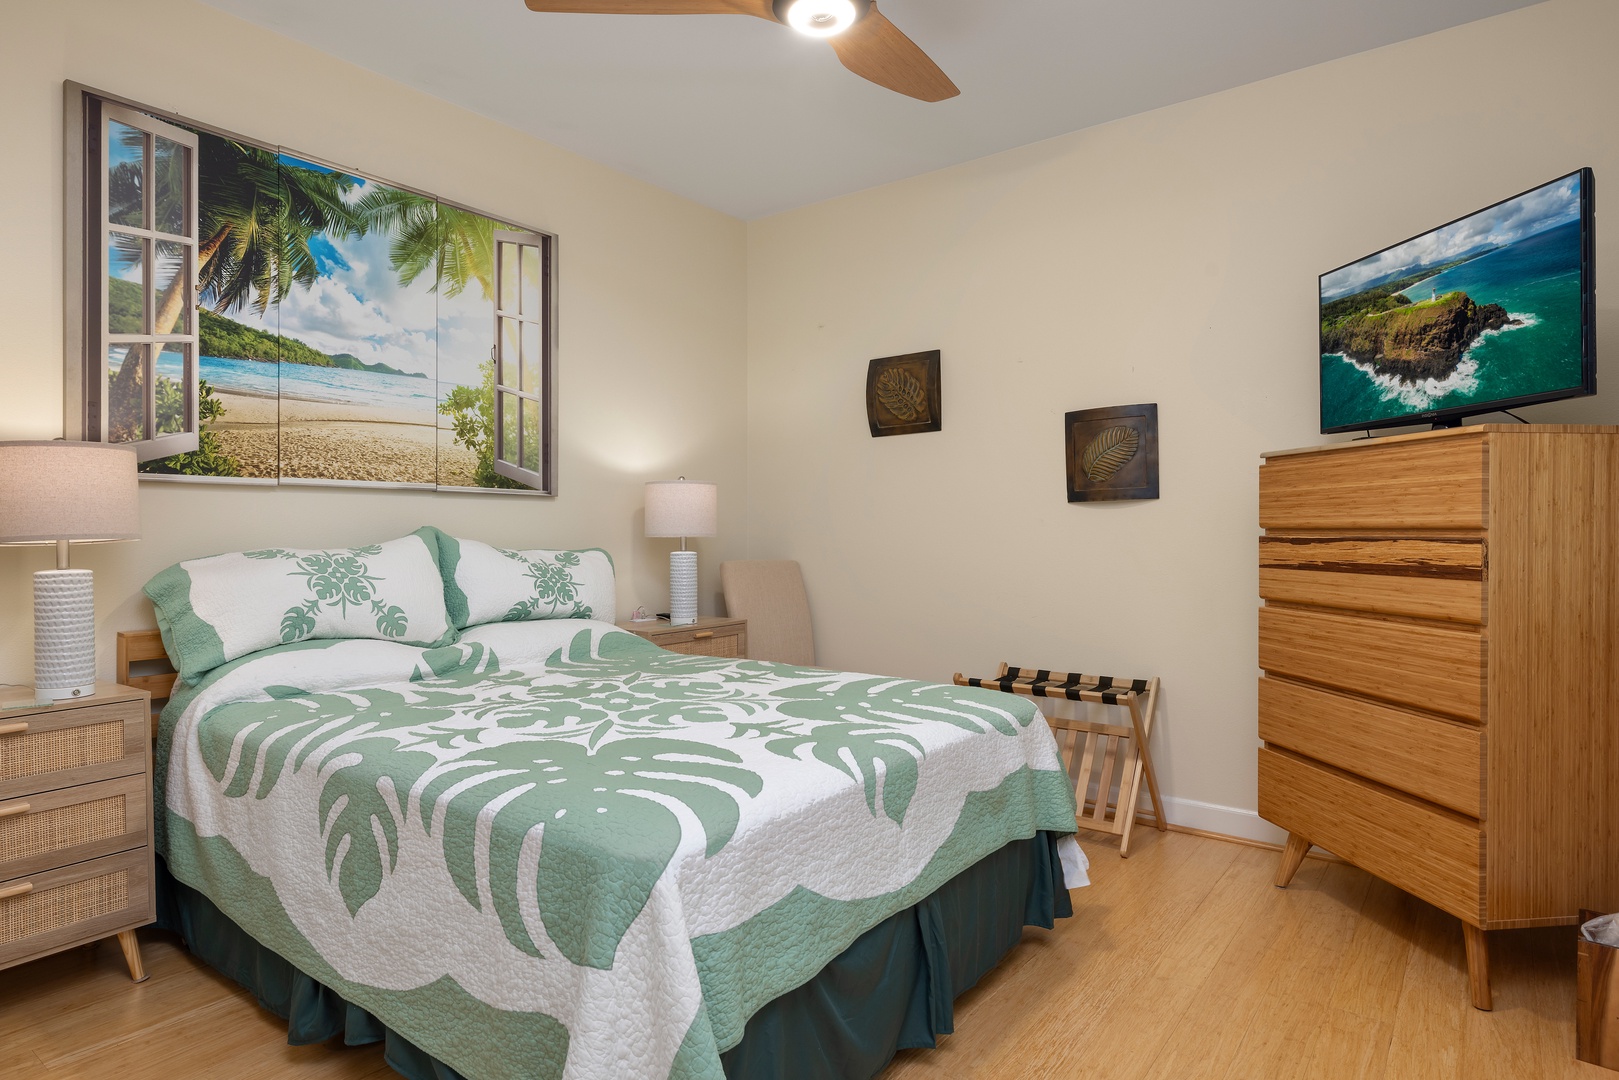 Kapolei Vacation Rentals, Ko Olina Kai 1083C - The downstairs guest bedroom with bright decor.